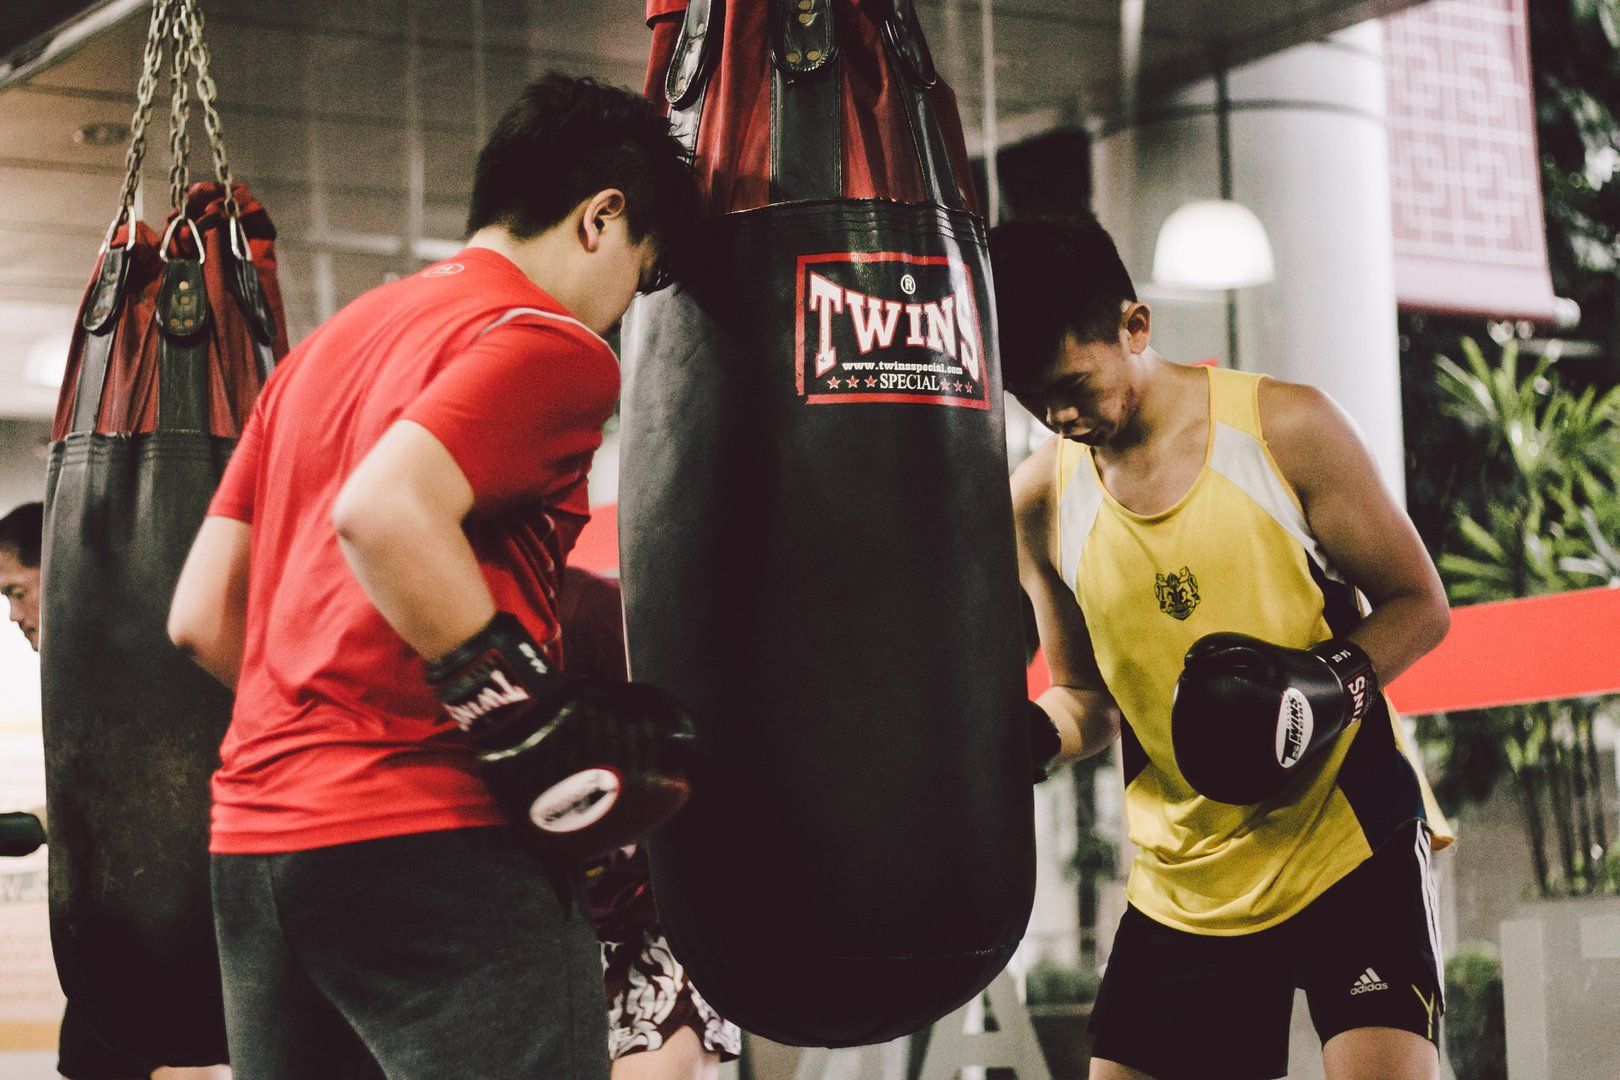 Training with a heavy bag helps improve your technique and coordination.